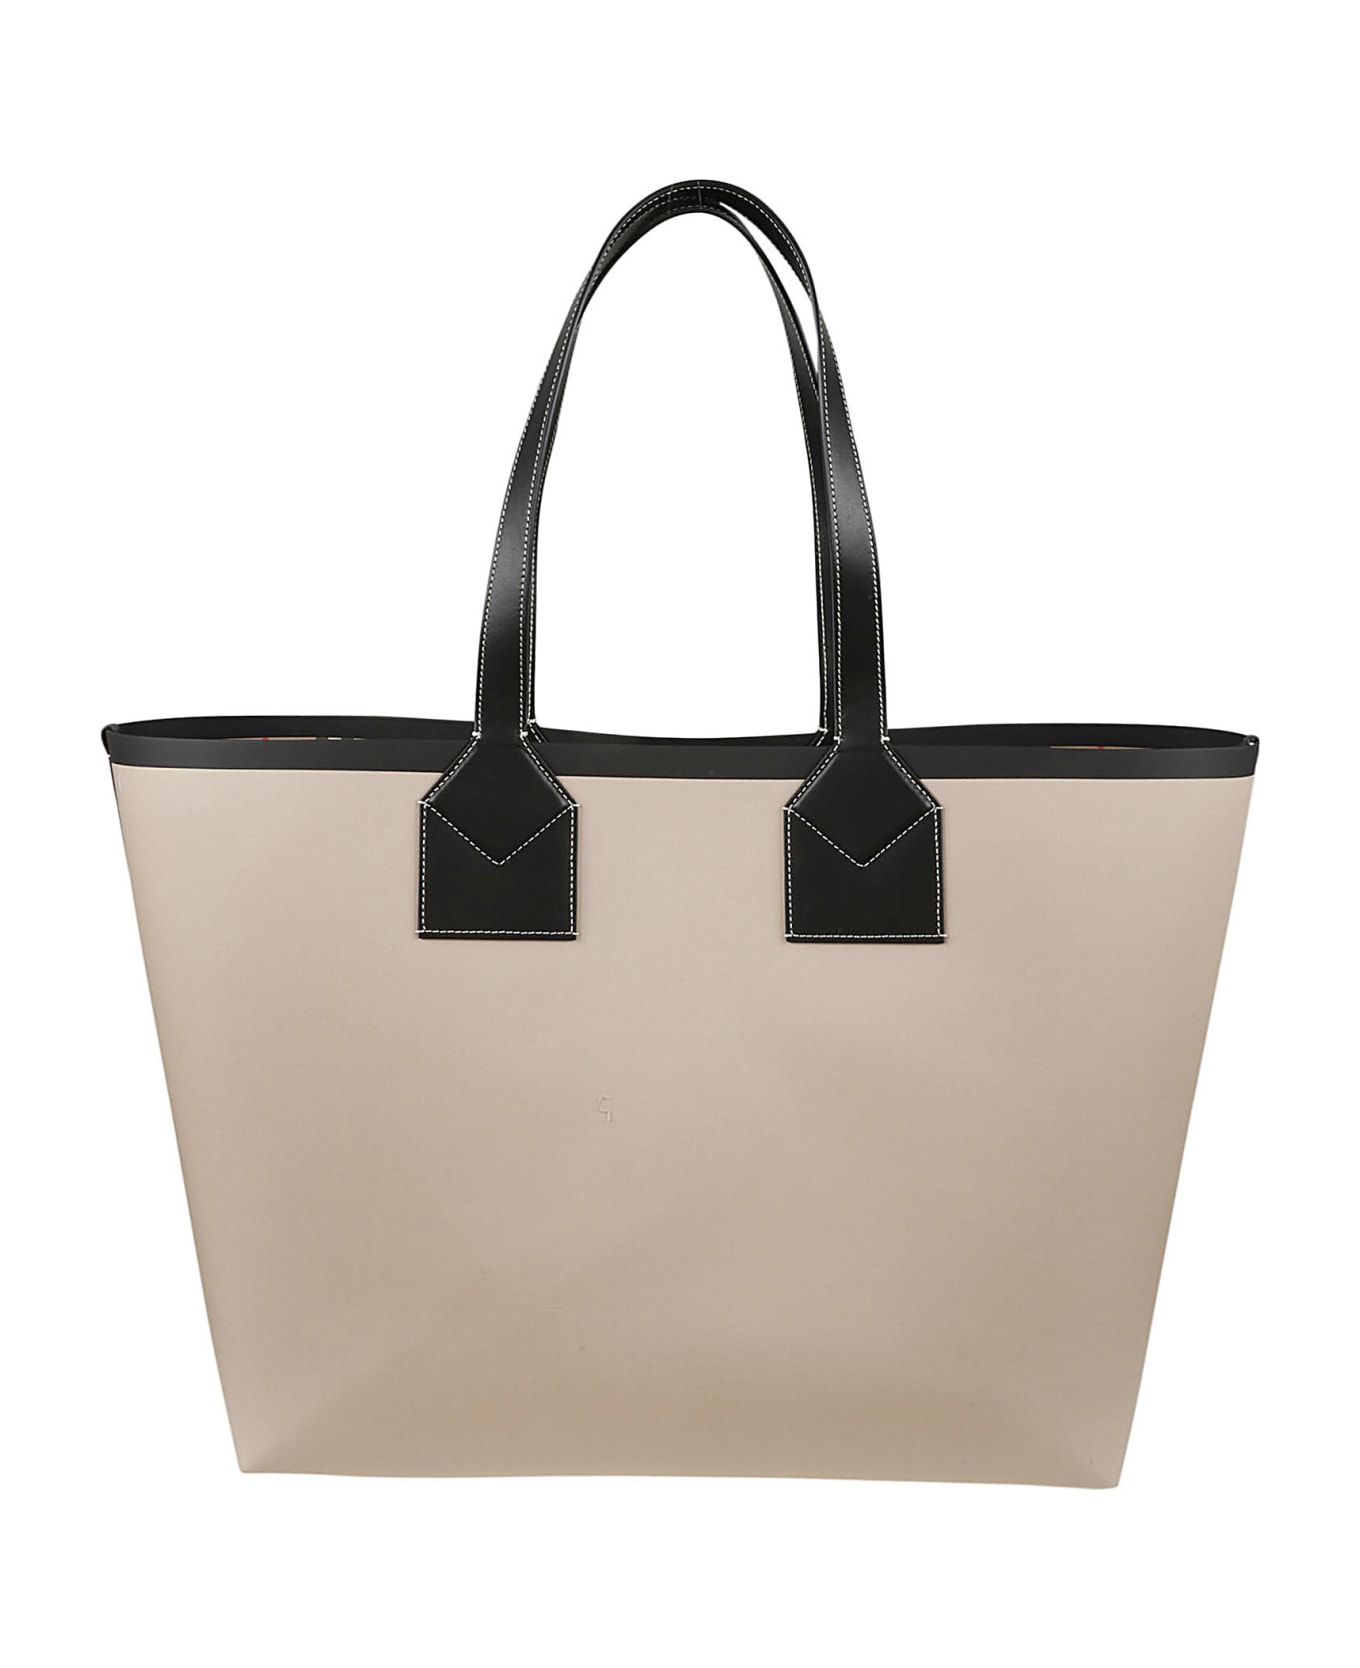 Burberry Large Heritage Tote - Beige トートバッグ